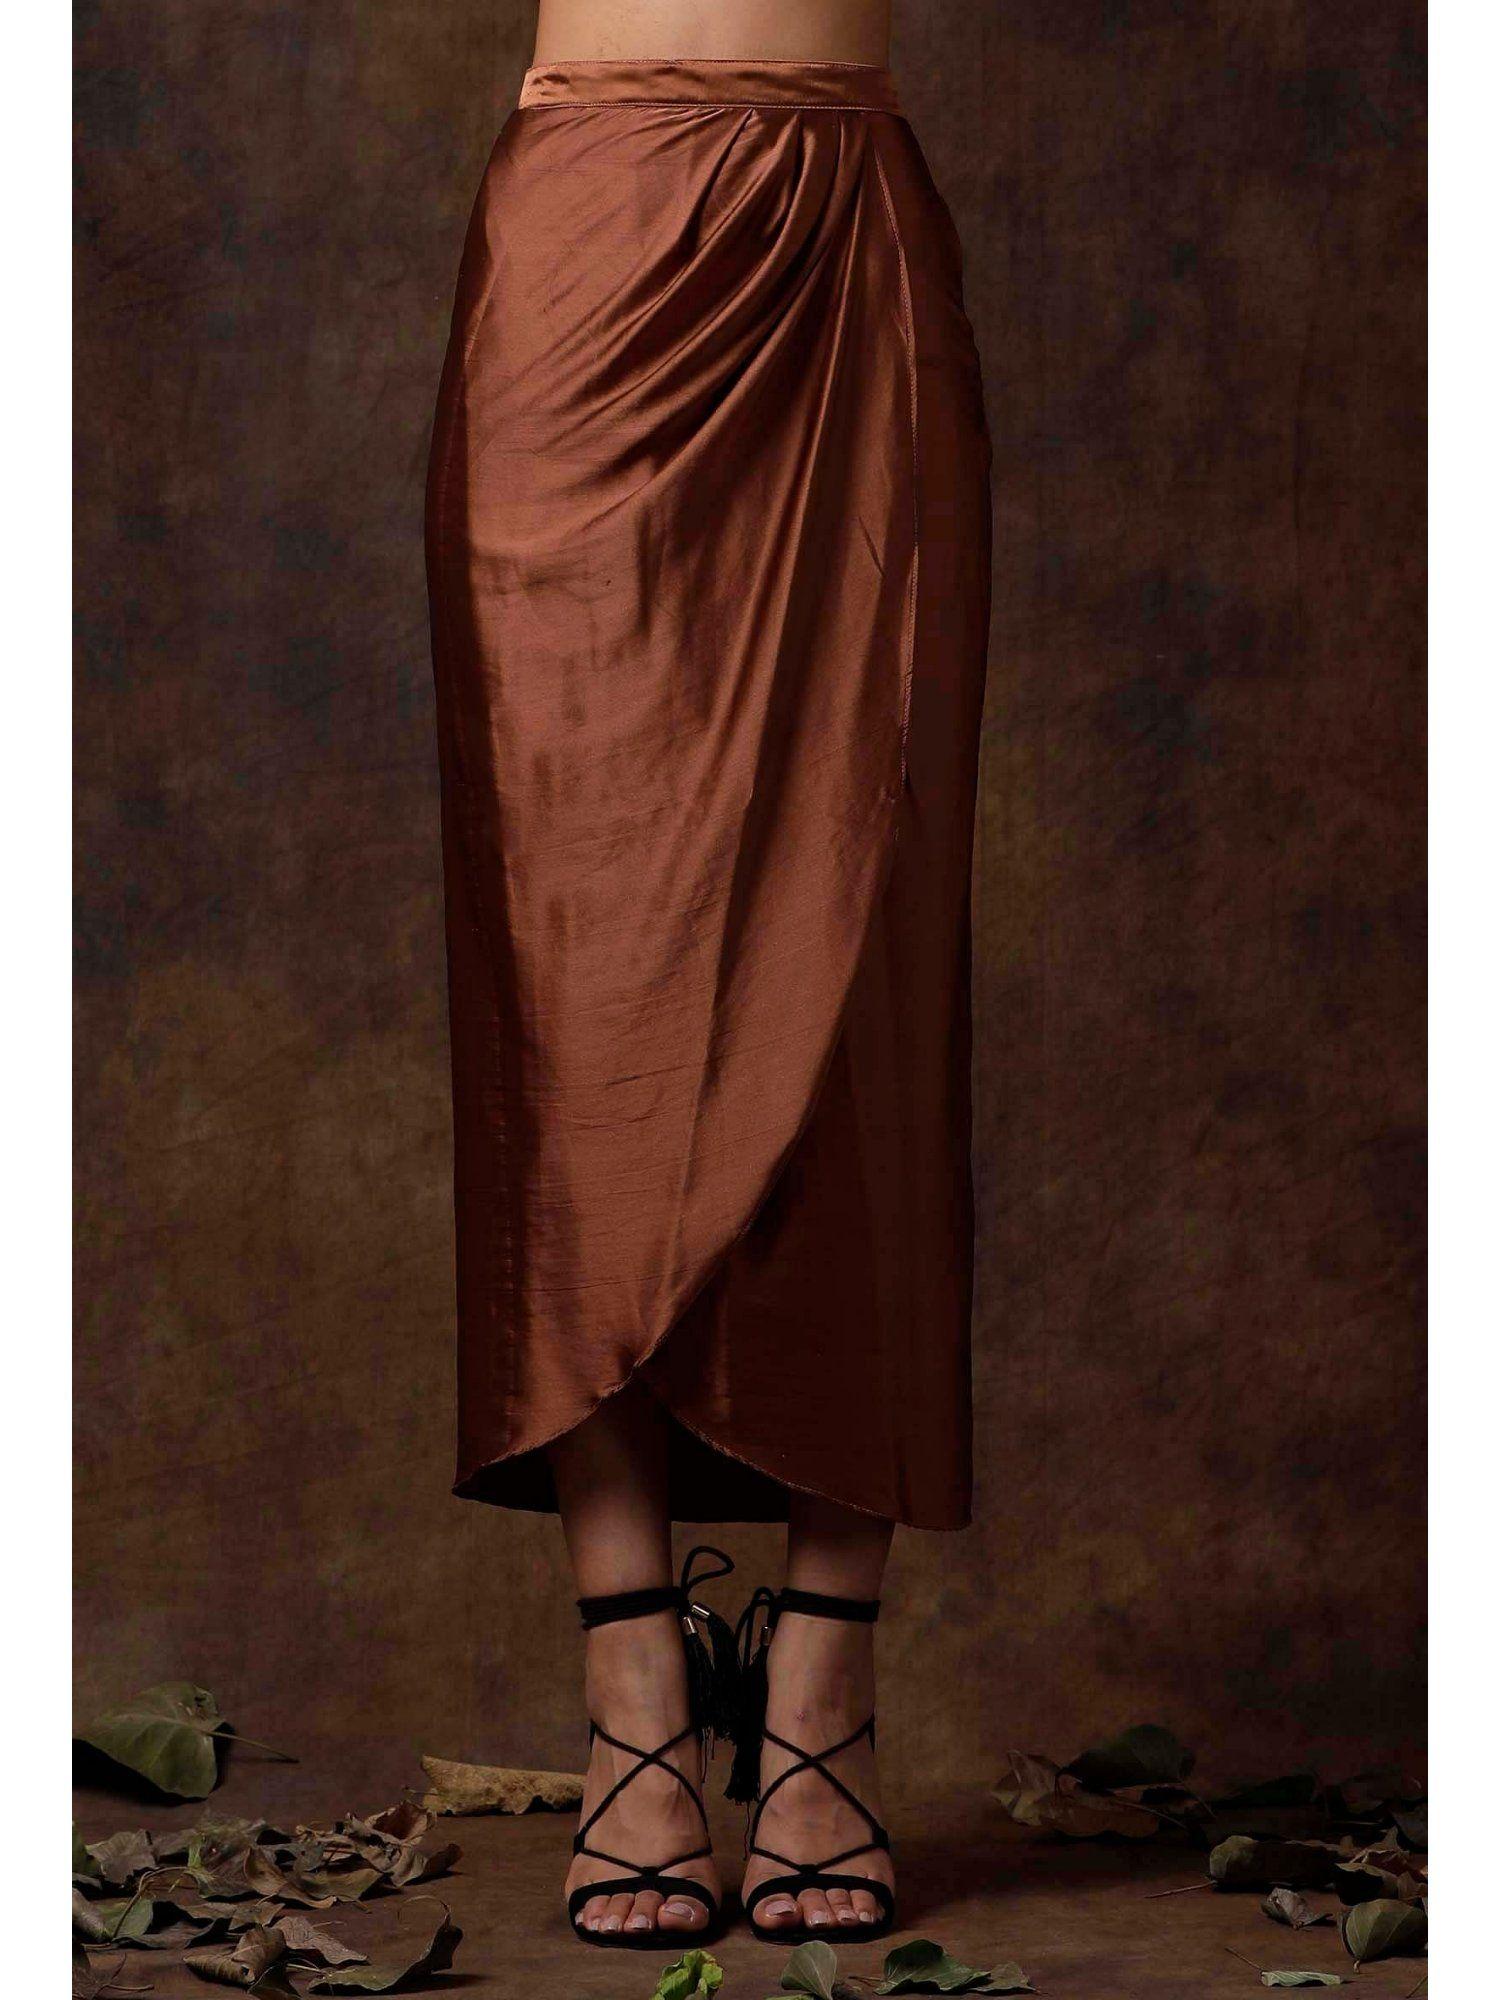 russet brown overlap stitched skirt